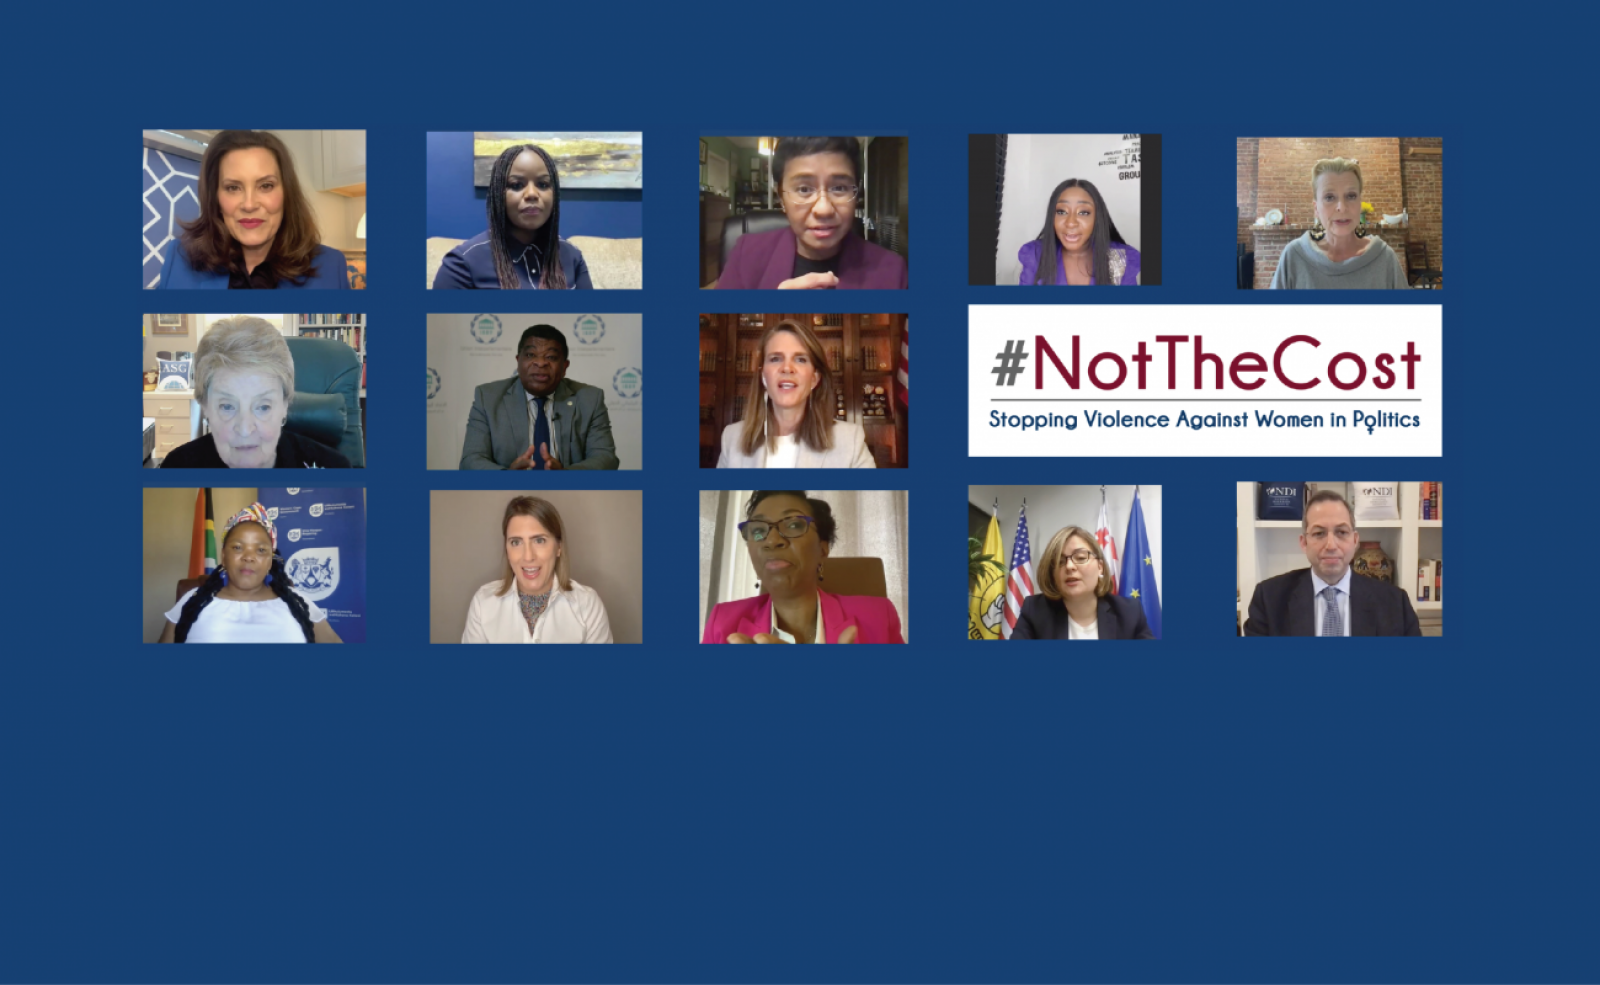 #NotTheCost: Stopping Violence Against Women in Politics